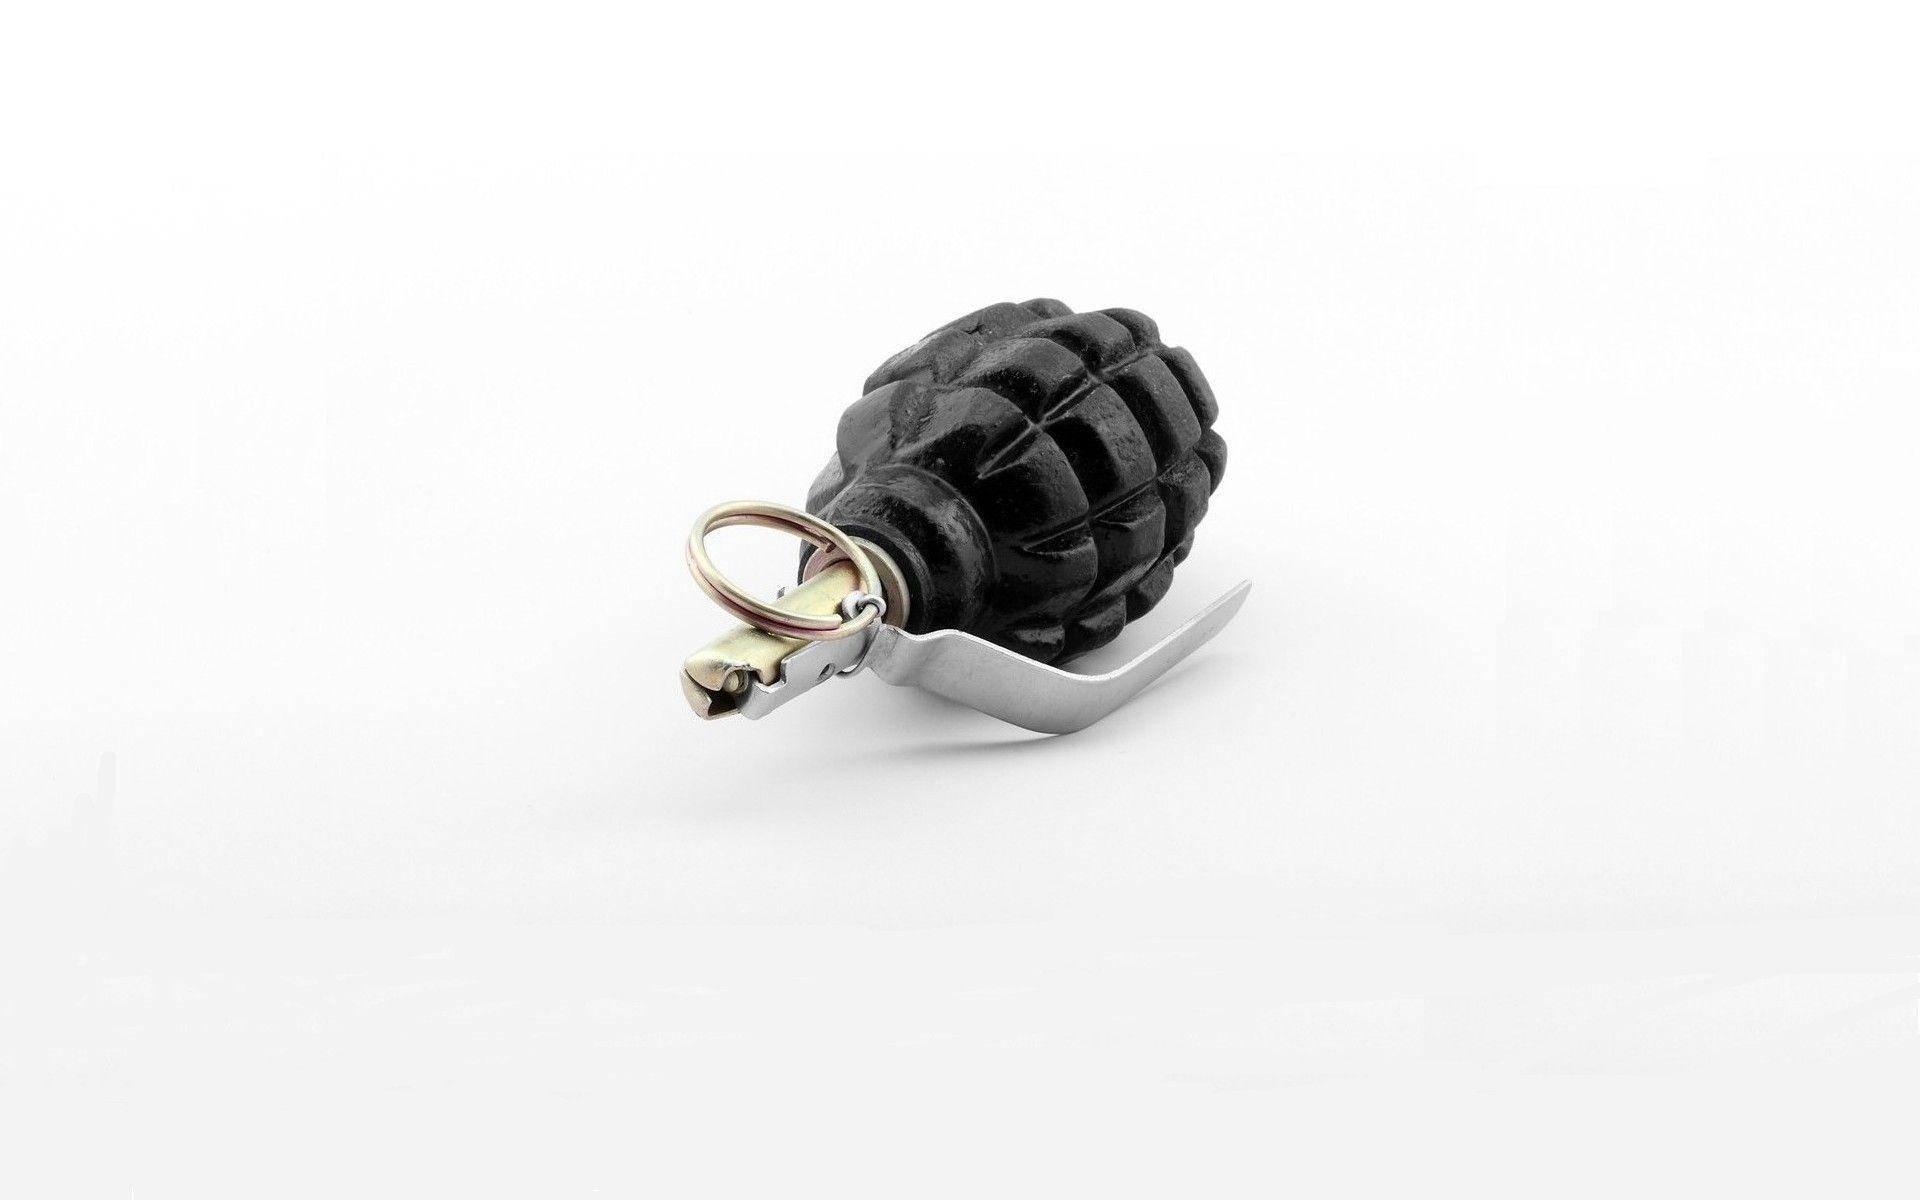 Grenade Full HD Wallpaper and Background Imagex1200